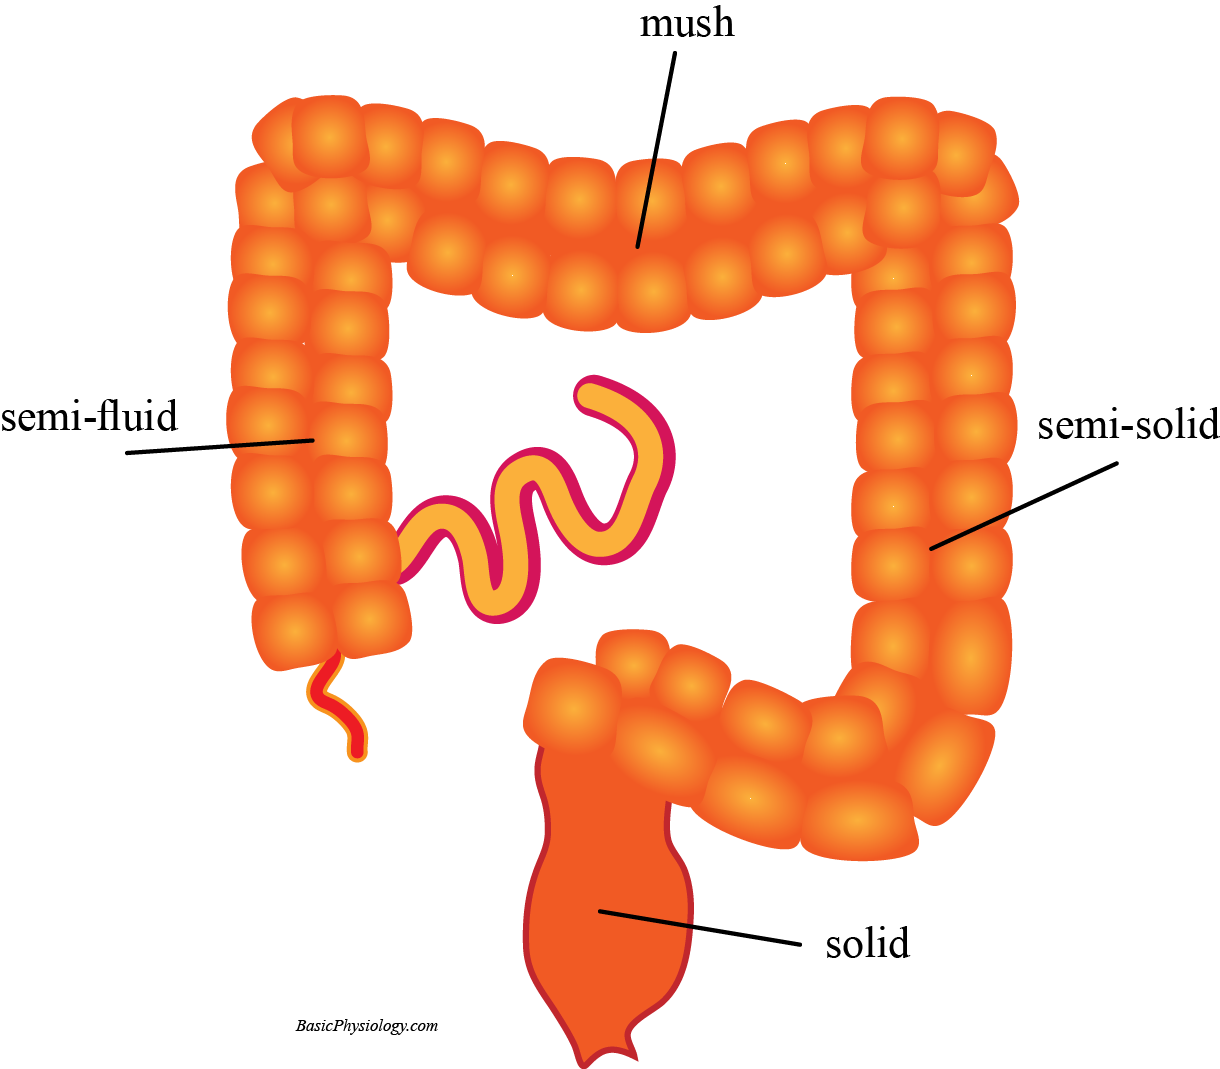 Gradual transition of the chime in the colon; from semi-fluid to semi-solid 